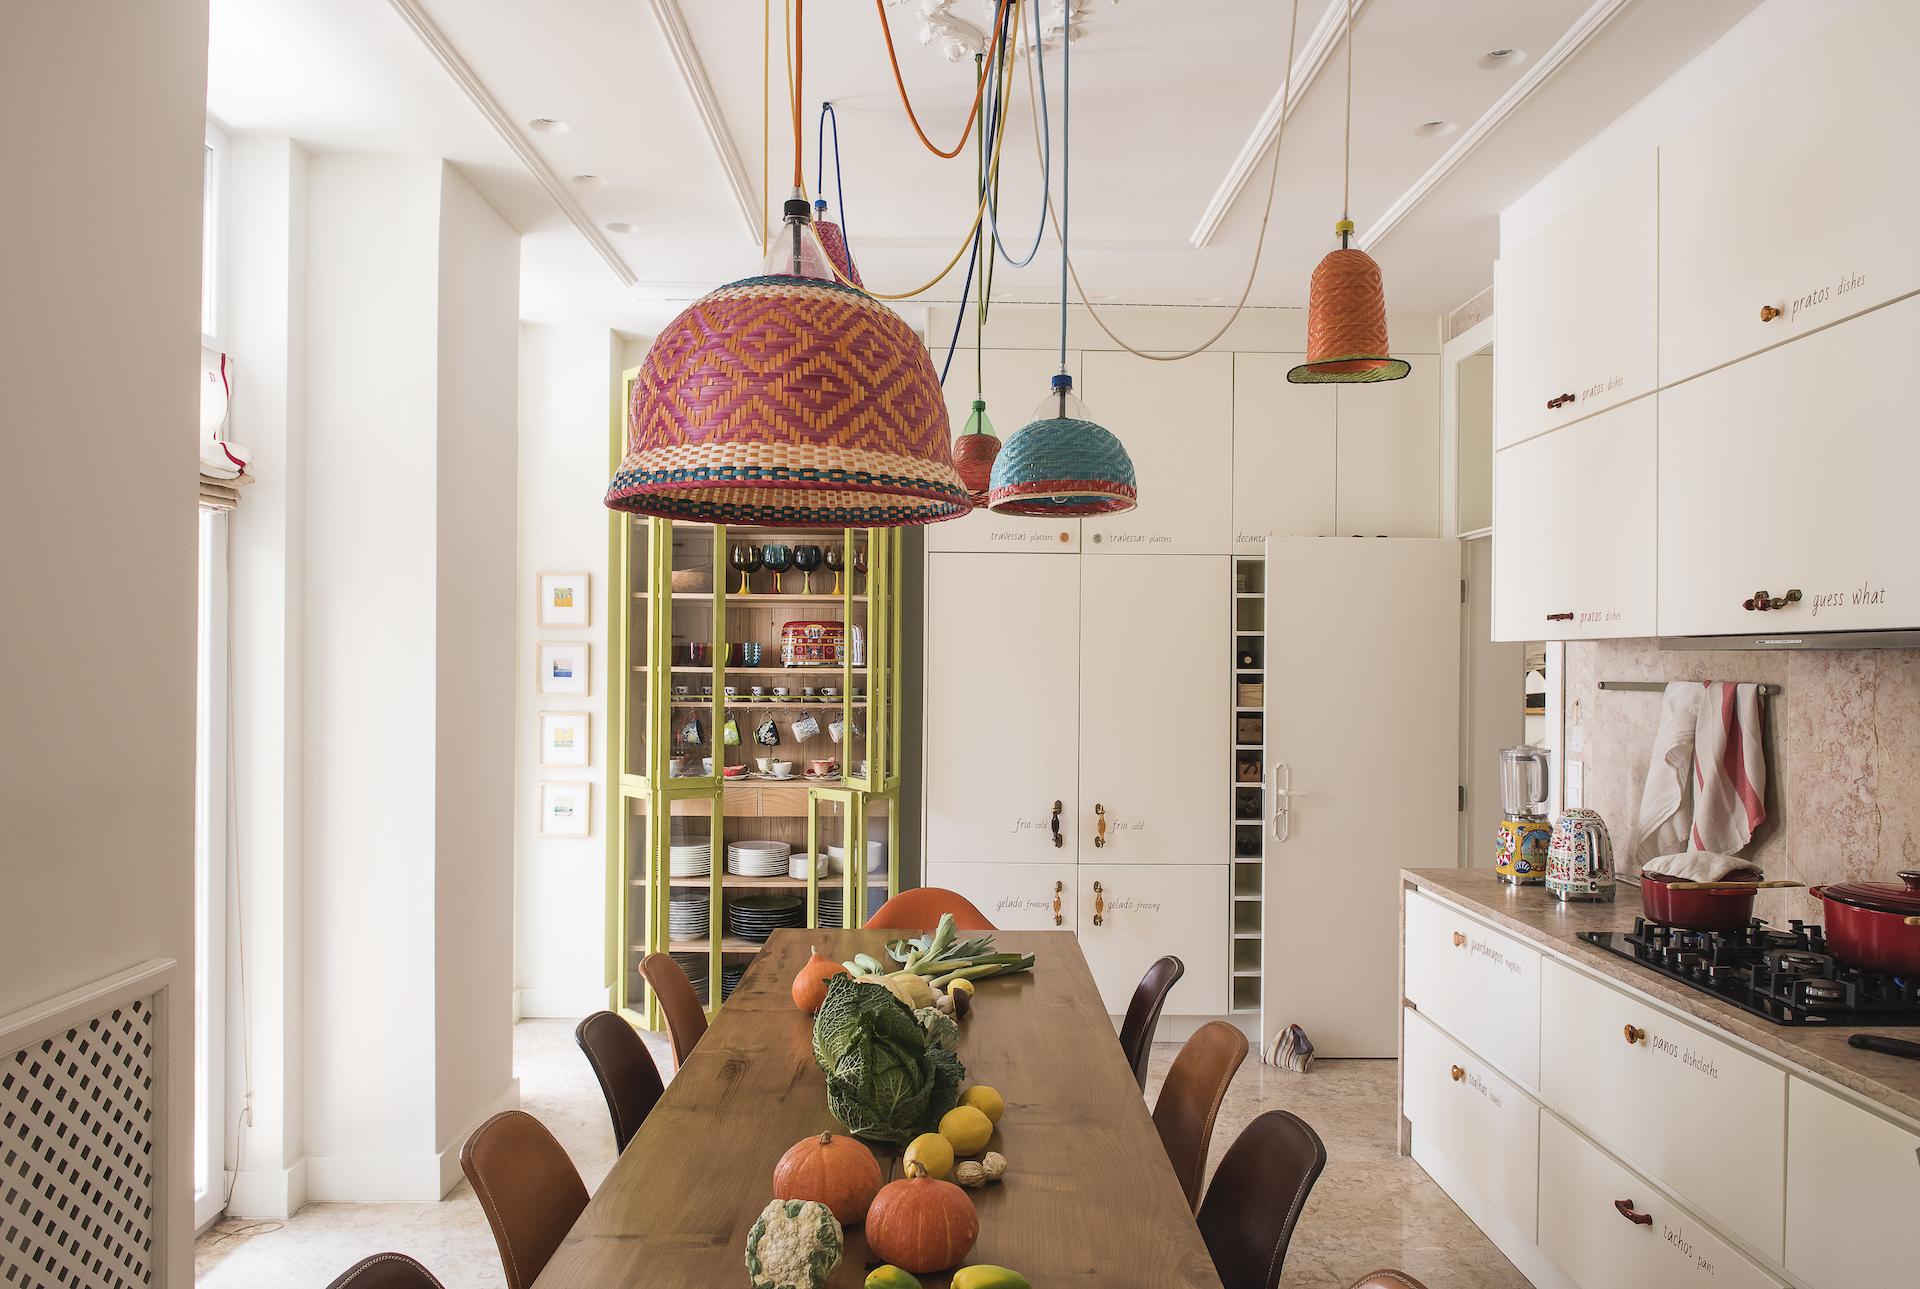 An Eclectic Residence in Lisbon Where Many Cultures Coexist